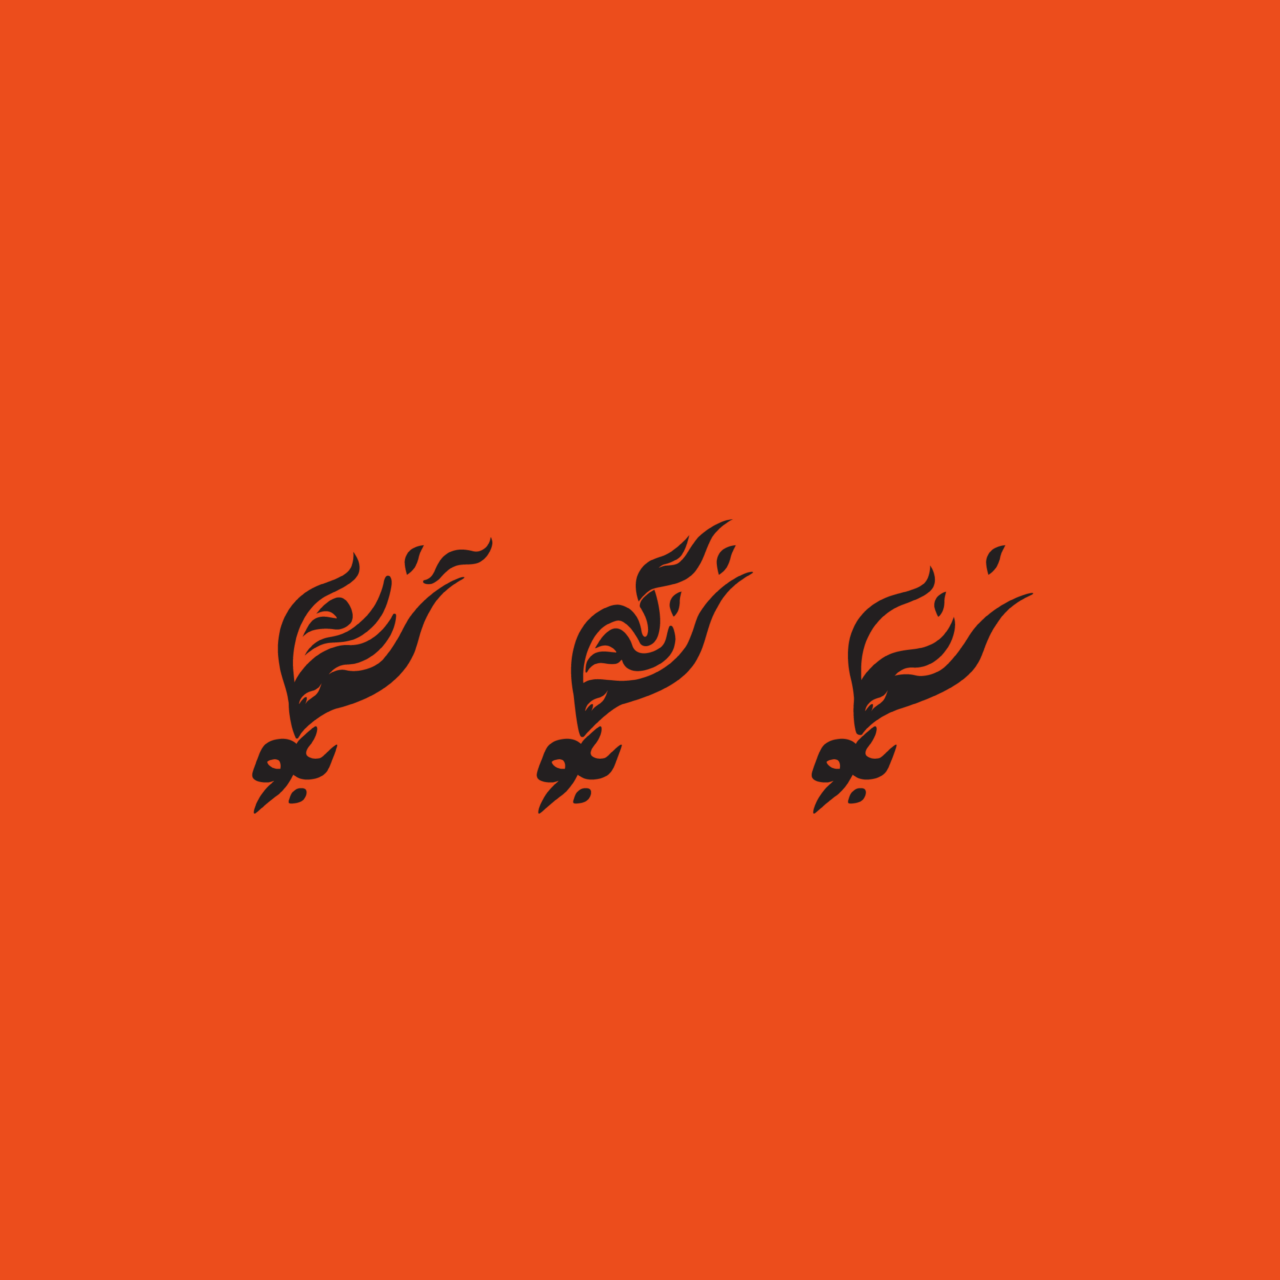 The collective’s logo design of the word Begoo* in black is repeated three times, each paired with one word from the “Woman Life Freedom” slogan against a solid saturated orange background. The words Woman, Life, and Freedom, stylized and incorporated into the design of the logo, are meant to resemble long hair in the wind as well as flame tongues –a reference to Iranian women setting their scarves on fire. The text reads: بگو زن بگو زندگی بگو آزادی Begoo Zan, Begoo Zendegi, Begoo Azadi Translation: Say Woman, Say Life, Say Freedom *Begoo means “Speak Up” or “Say it”, often used in the protest chants in Iran in conjunction with the chant “freedom freedom freedom”.